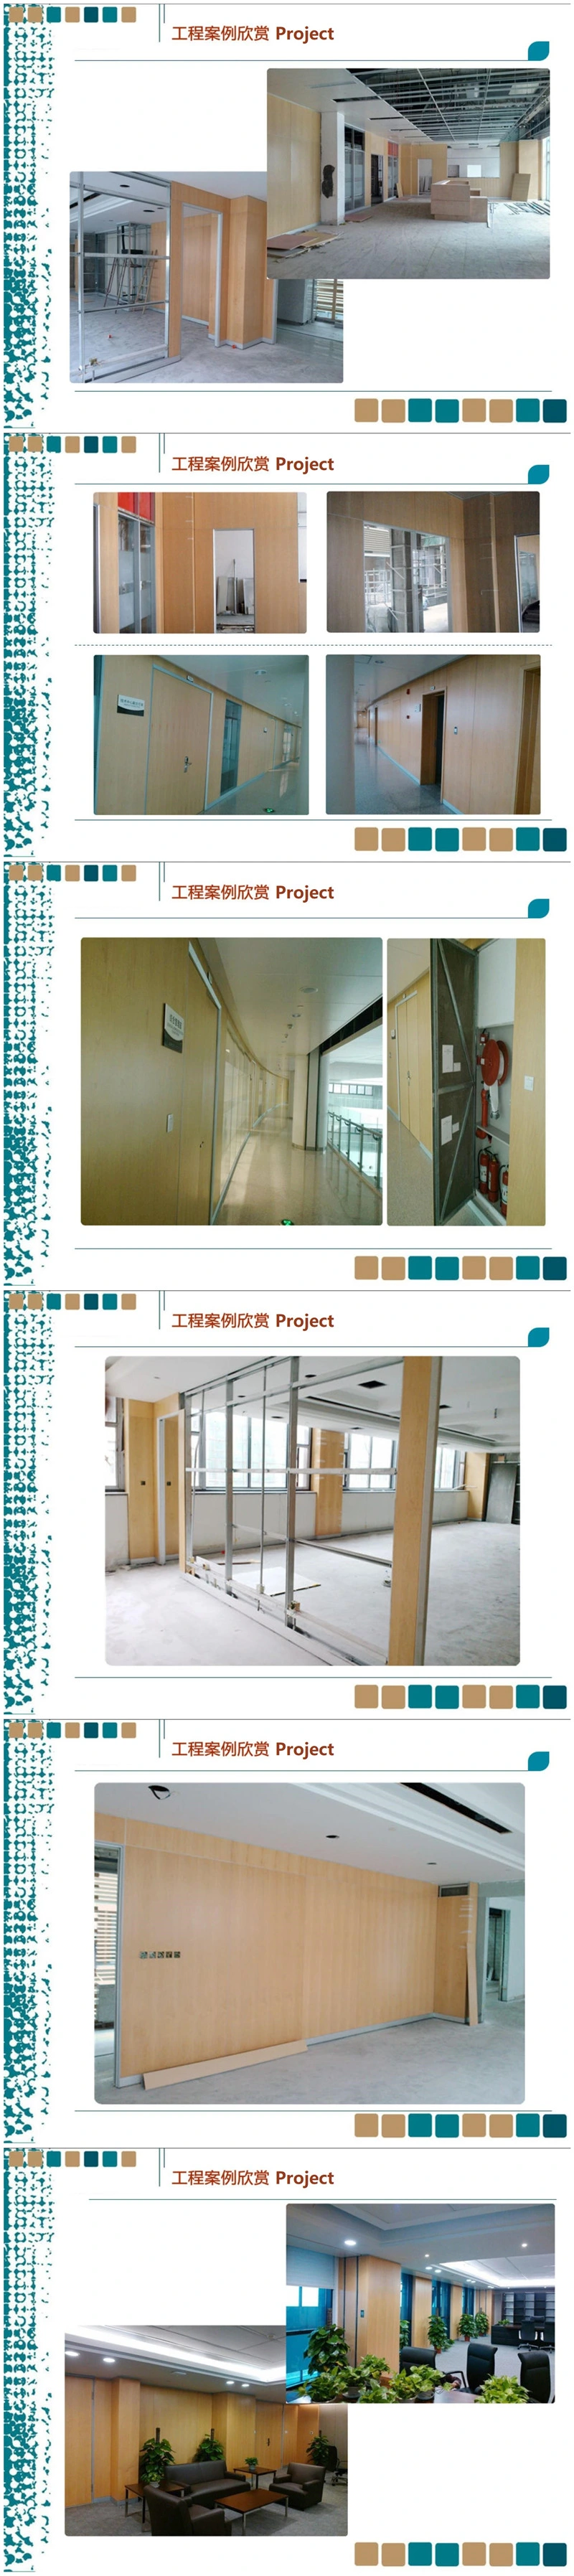 Boiler Insulation Material Fireproof High Density Fire Resistant Ceramic Soluble Board